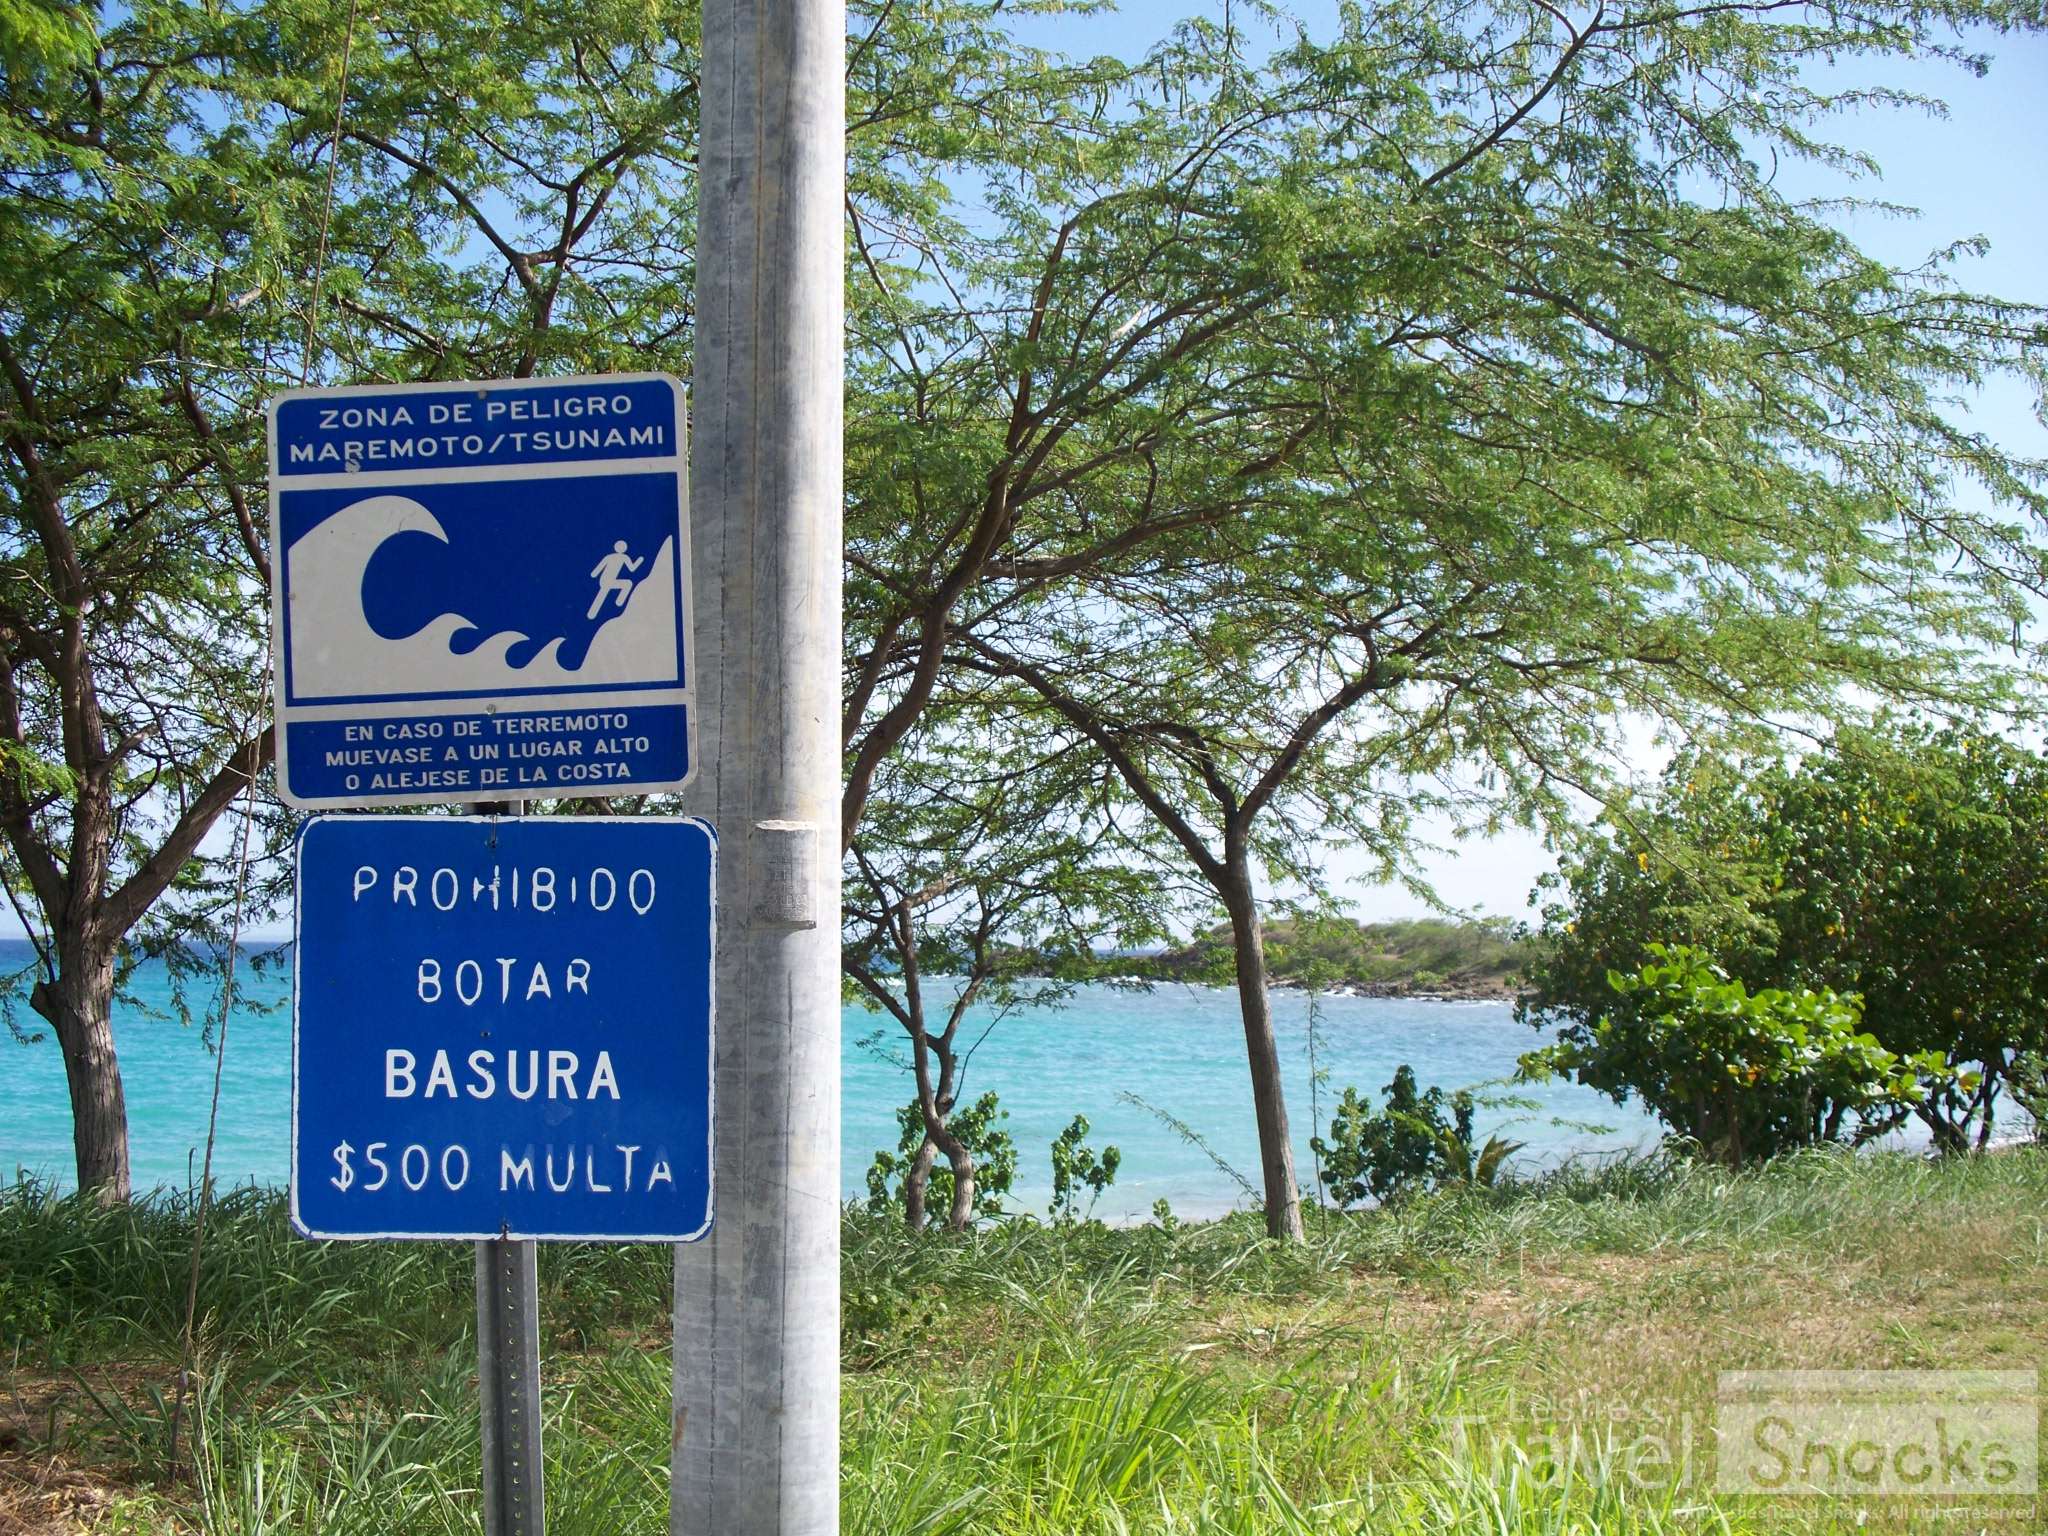 A bit unnerving seeing the tsunami evacuation signs. Not like there's anywhere you could get away from it.